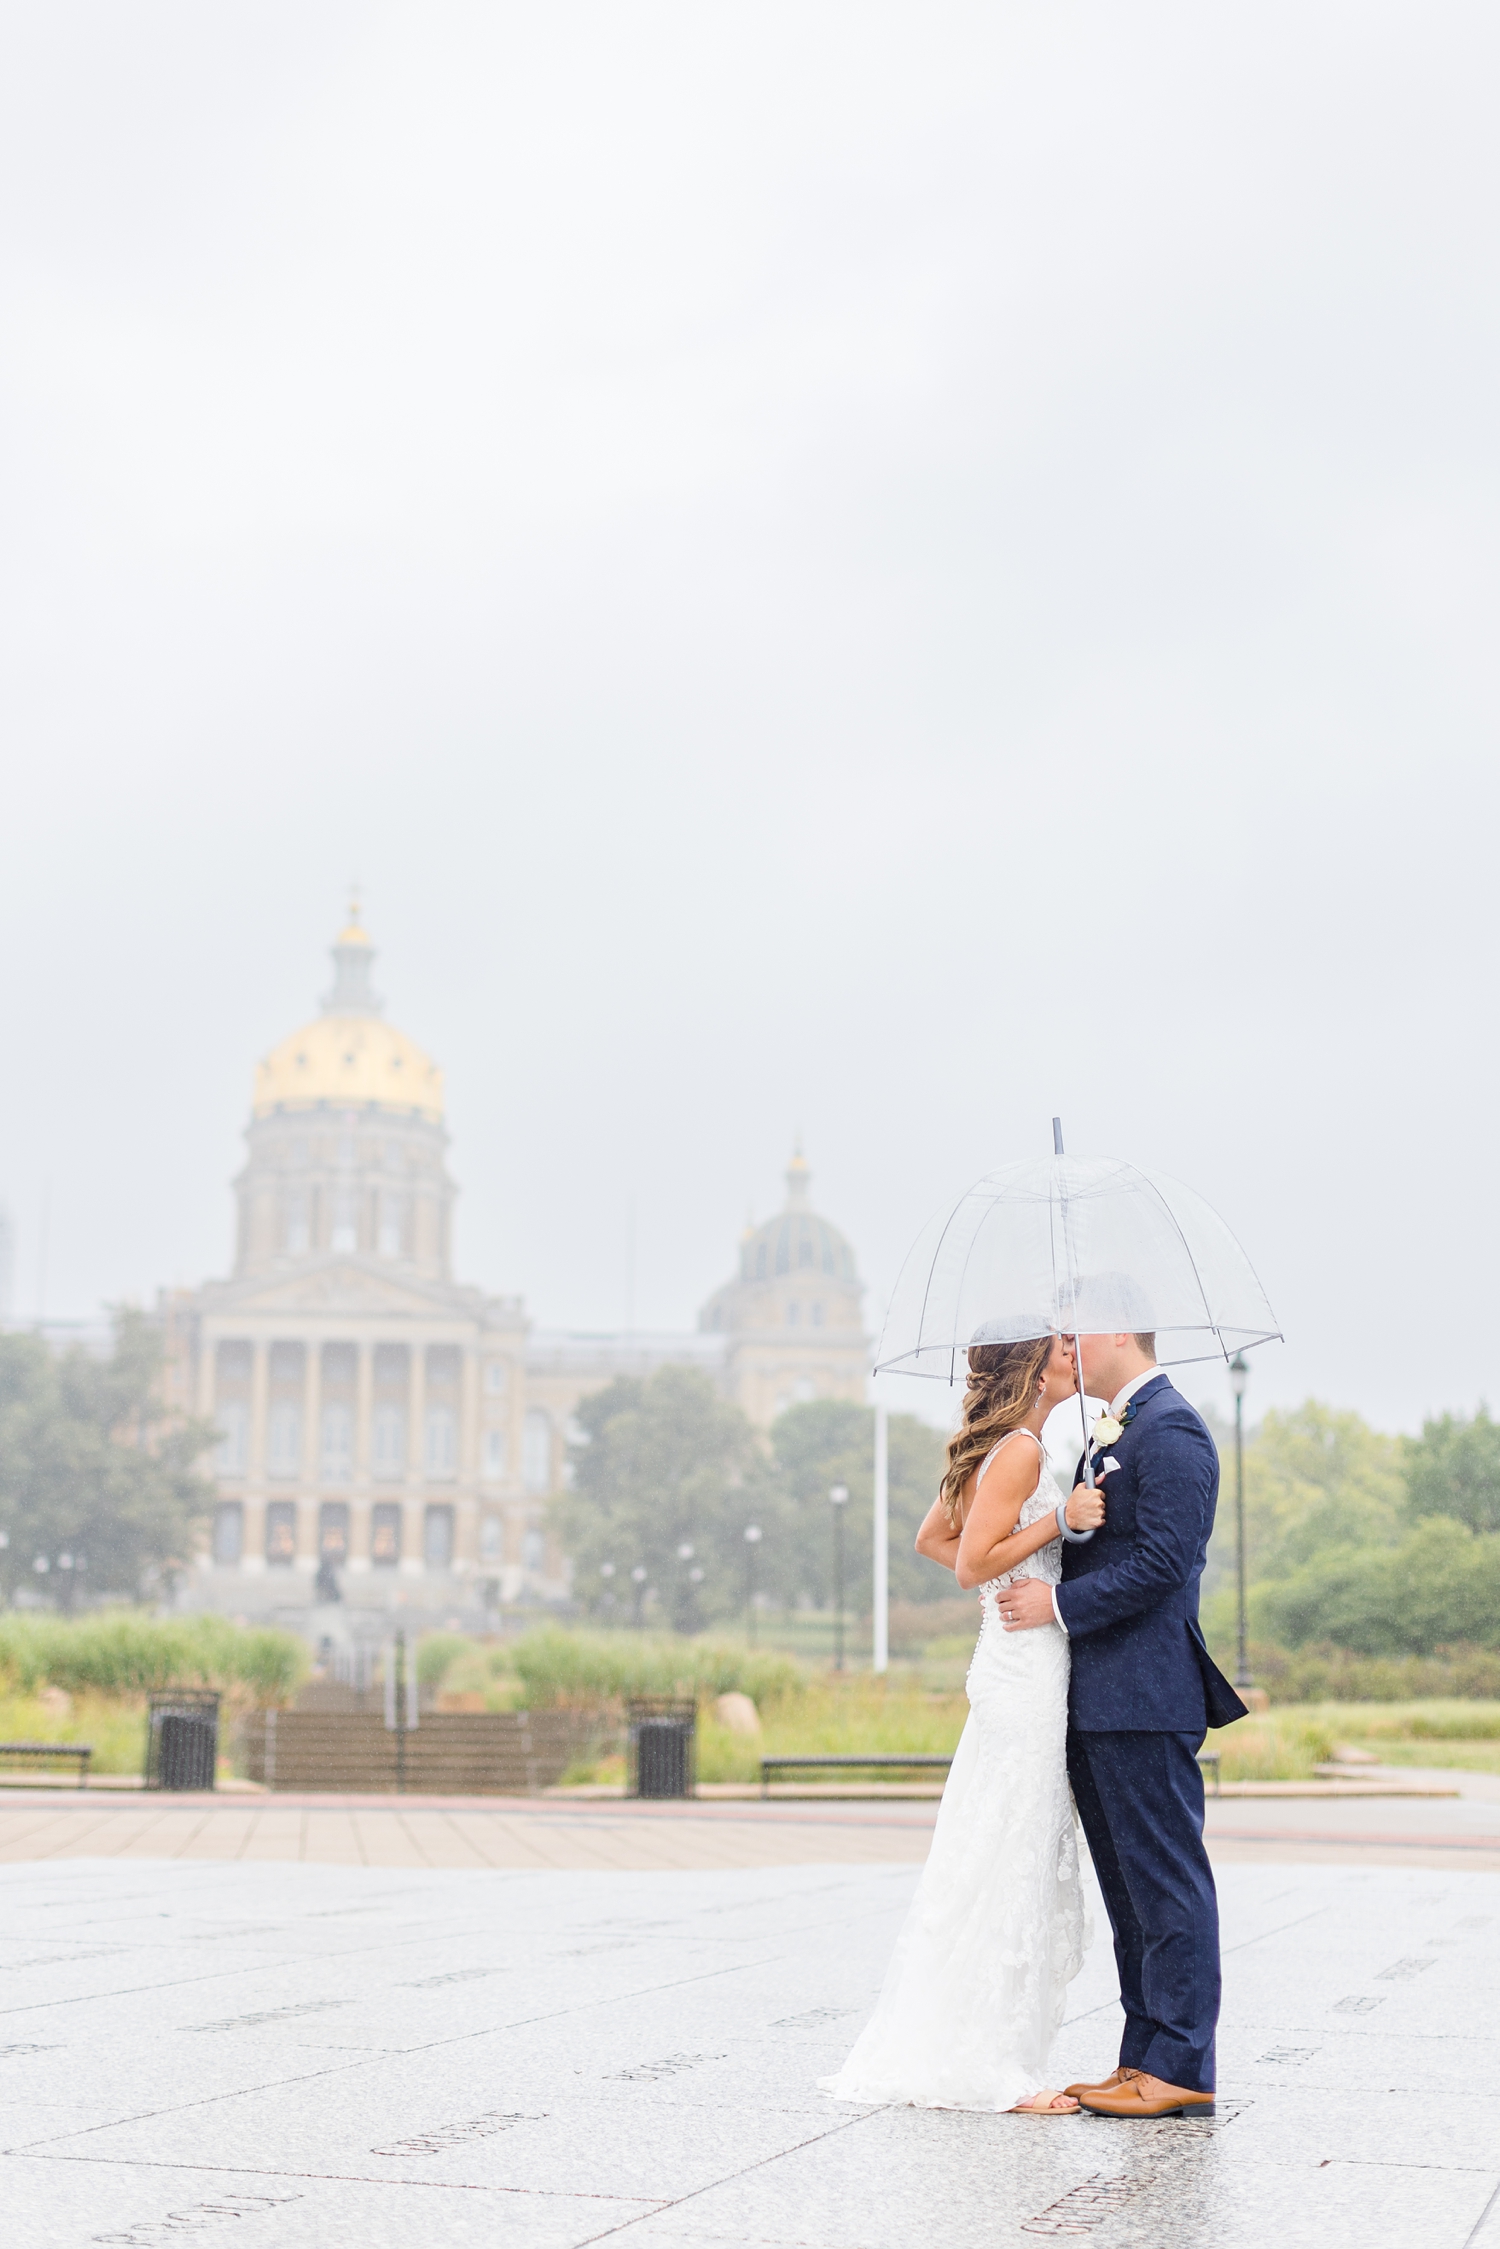 Bride and groom kiss under an umbrella in front of the Iowa capitol while it rains | CB Studio